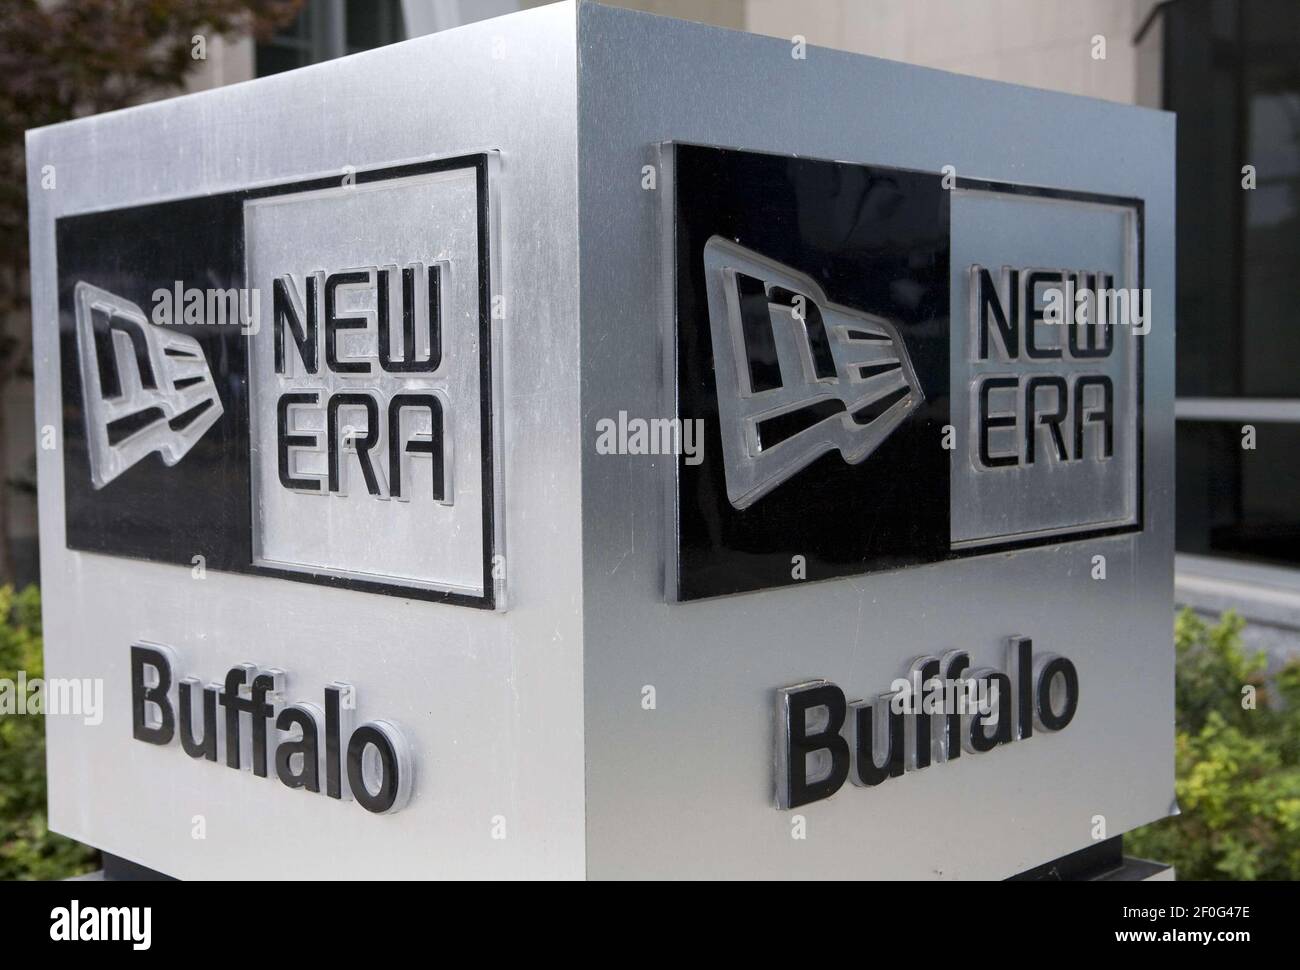 September 2010 - Buffalo, New York- The headquarters of the Era Cap Company. New Era is official license holder to produce all of the on-field caps for Major League